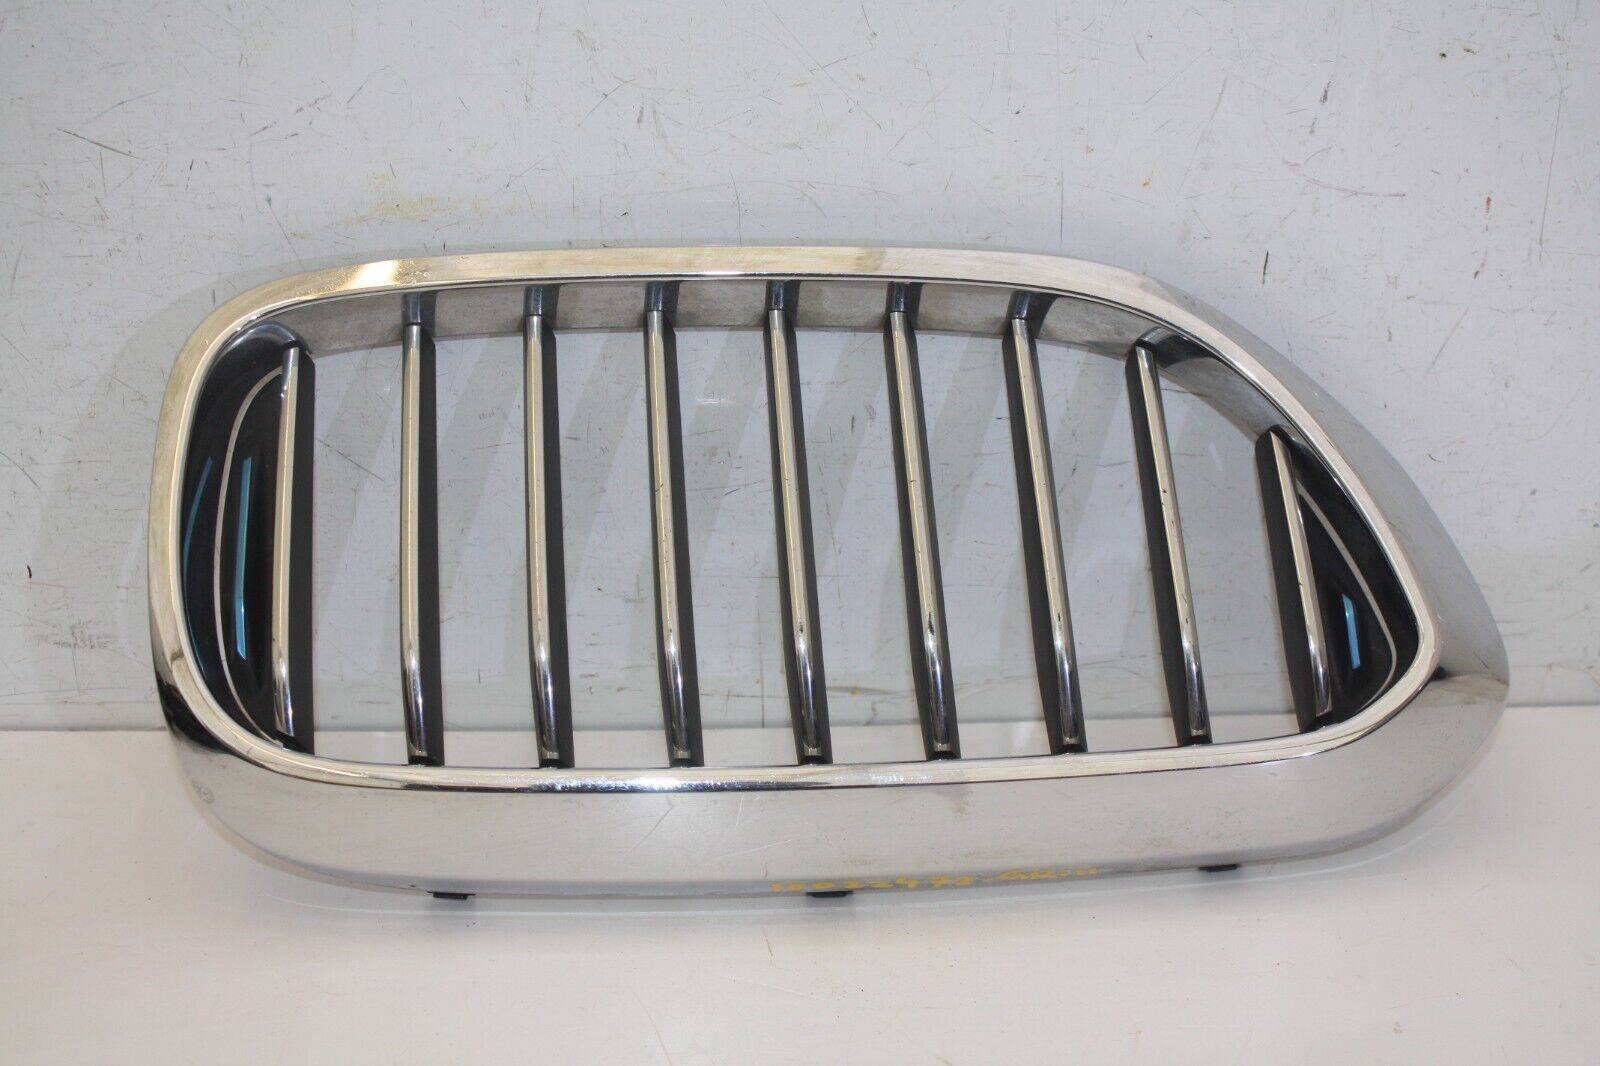 BMW 5 Series G30 G31 Front Bumper Right Kidney Grill 2017 TO 2020 7383520 176234548246